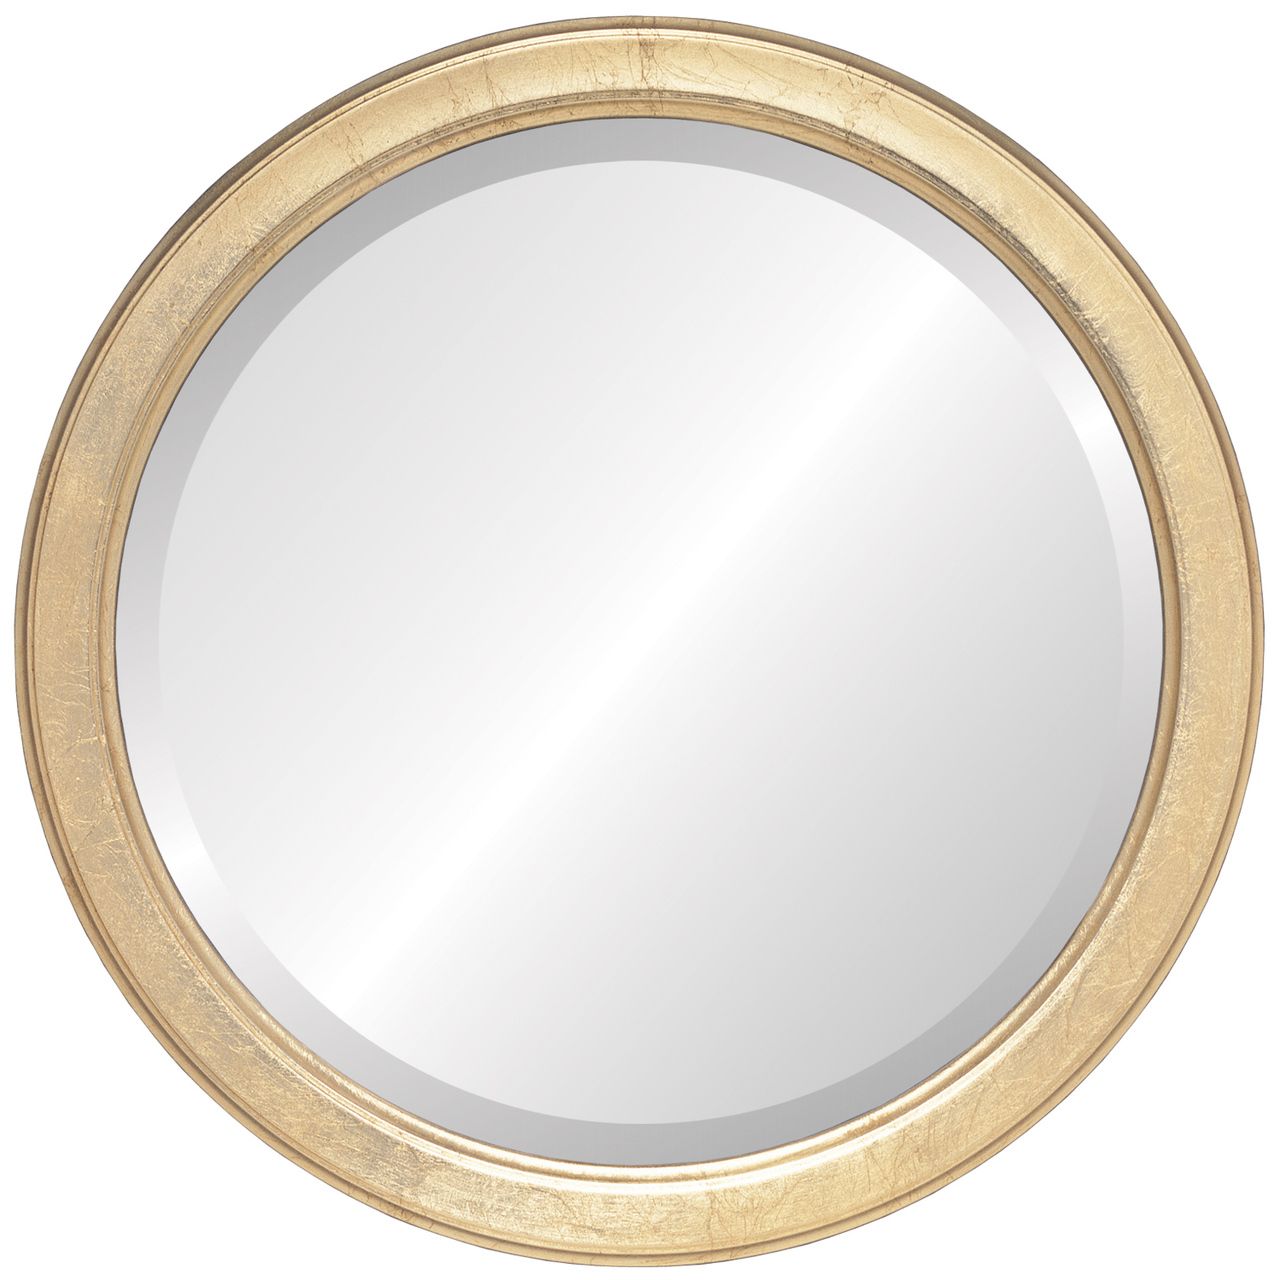 Best And Newest Gold Rounded Edge Mirrors With Regard To Contemporary Gold Round Mirrors From $ (View 1 of 15)